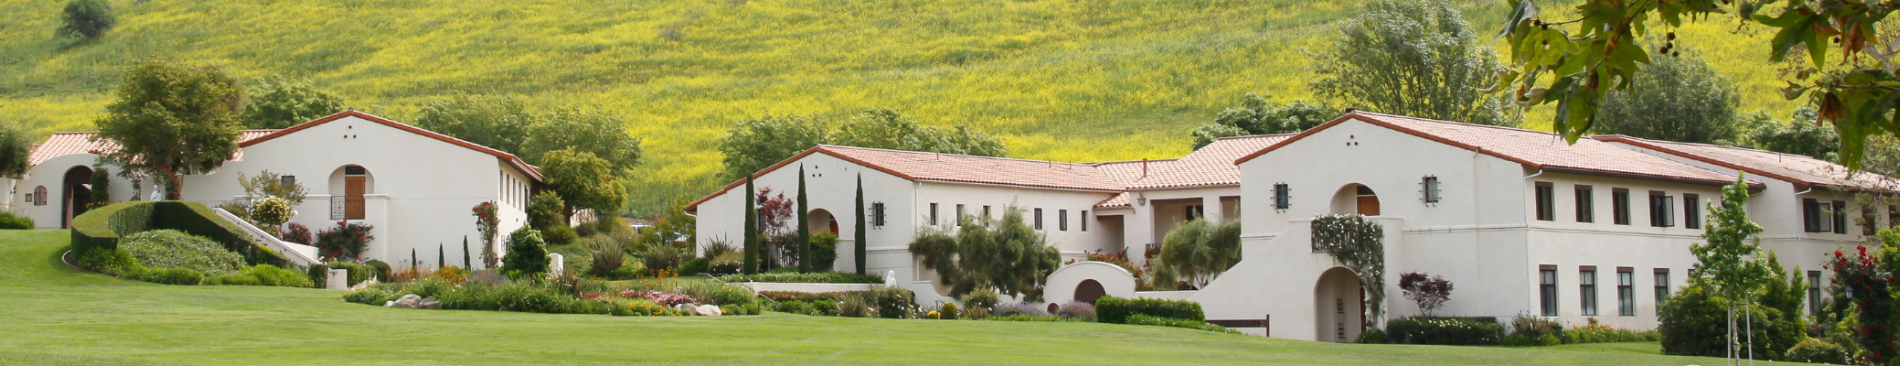 Residence halls on the California campus